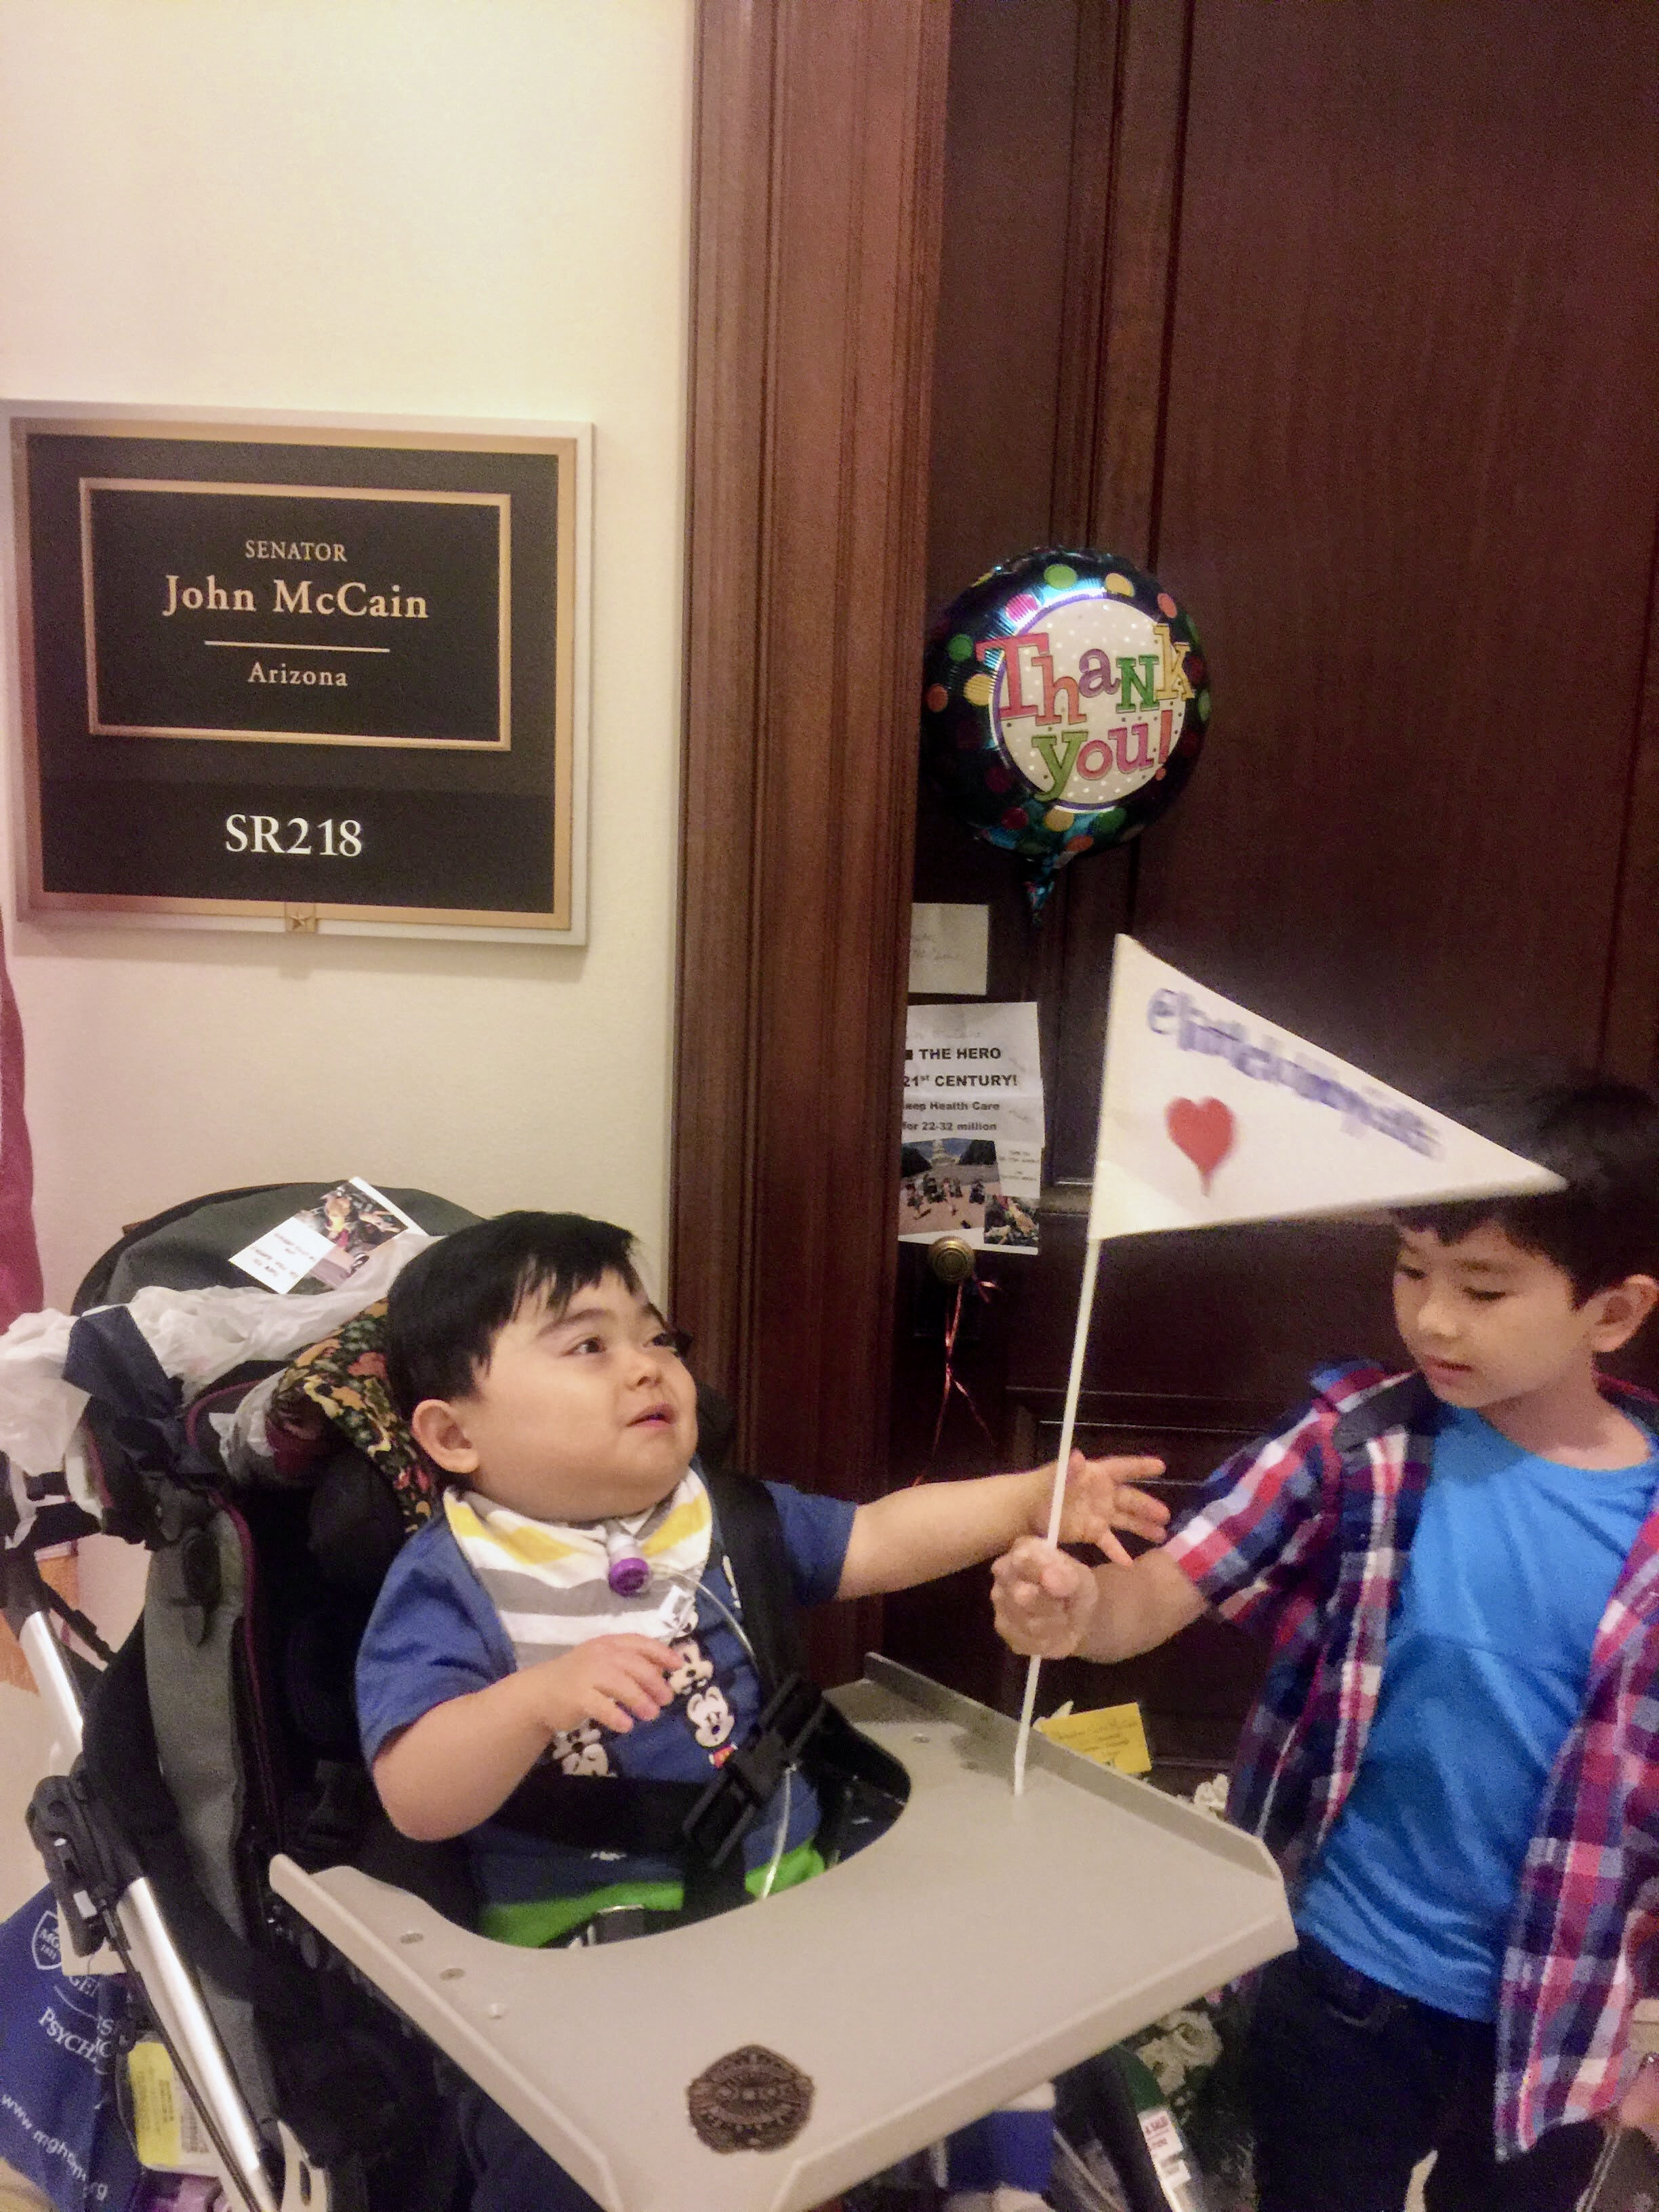  A young boy sitting in a wheelchair and his sibling stand in front of a congressional office door. 